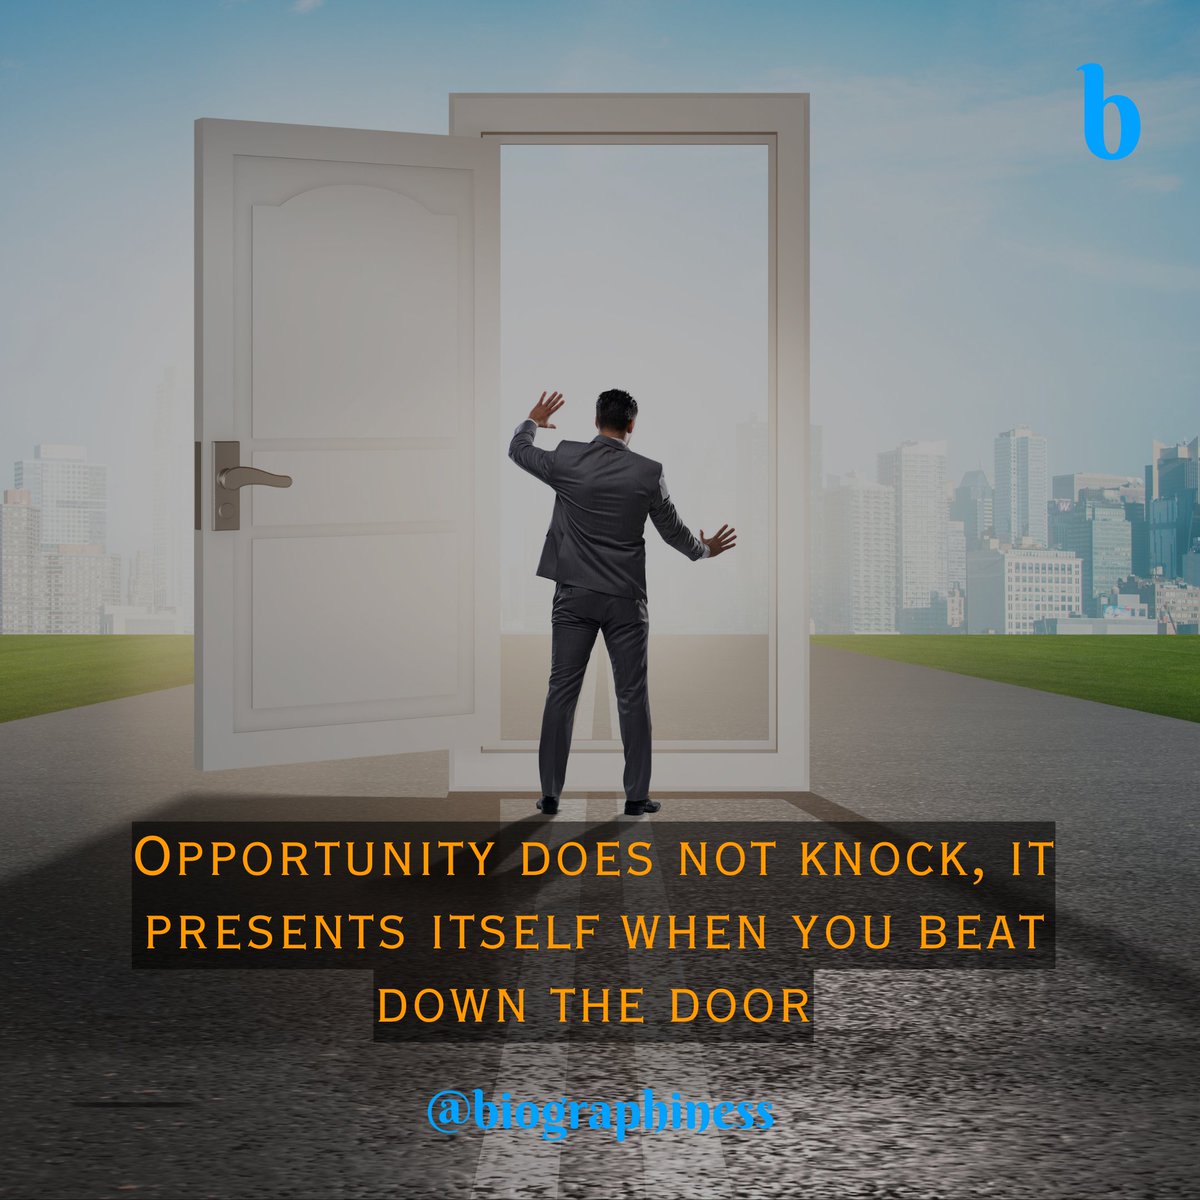 Opportunity doesn't just come knocking, you gotta go out and grab it!
What are you waiting for?
Follow👉 @biographiness

#Biographiness #Biograghines #Hustle #GoGetter #MakeItHappen #BreakDownBarriers #OpportunityAwaits #SeizeTheDay #Relentless #PersistencePaysOff #NeverSettle